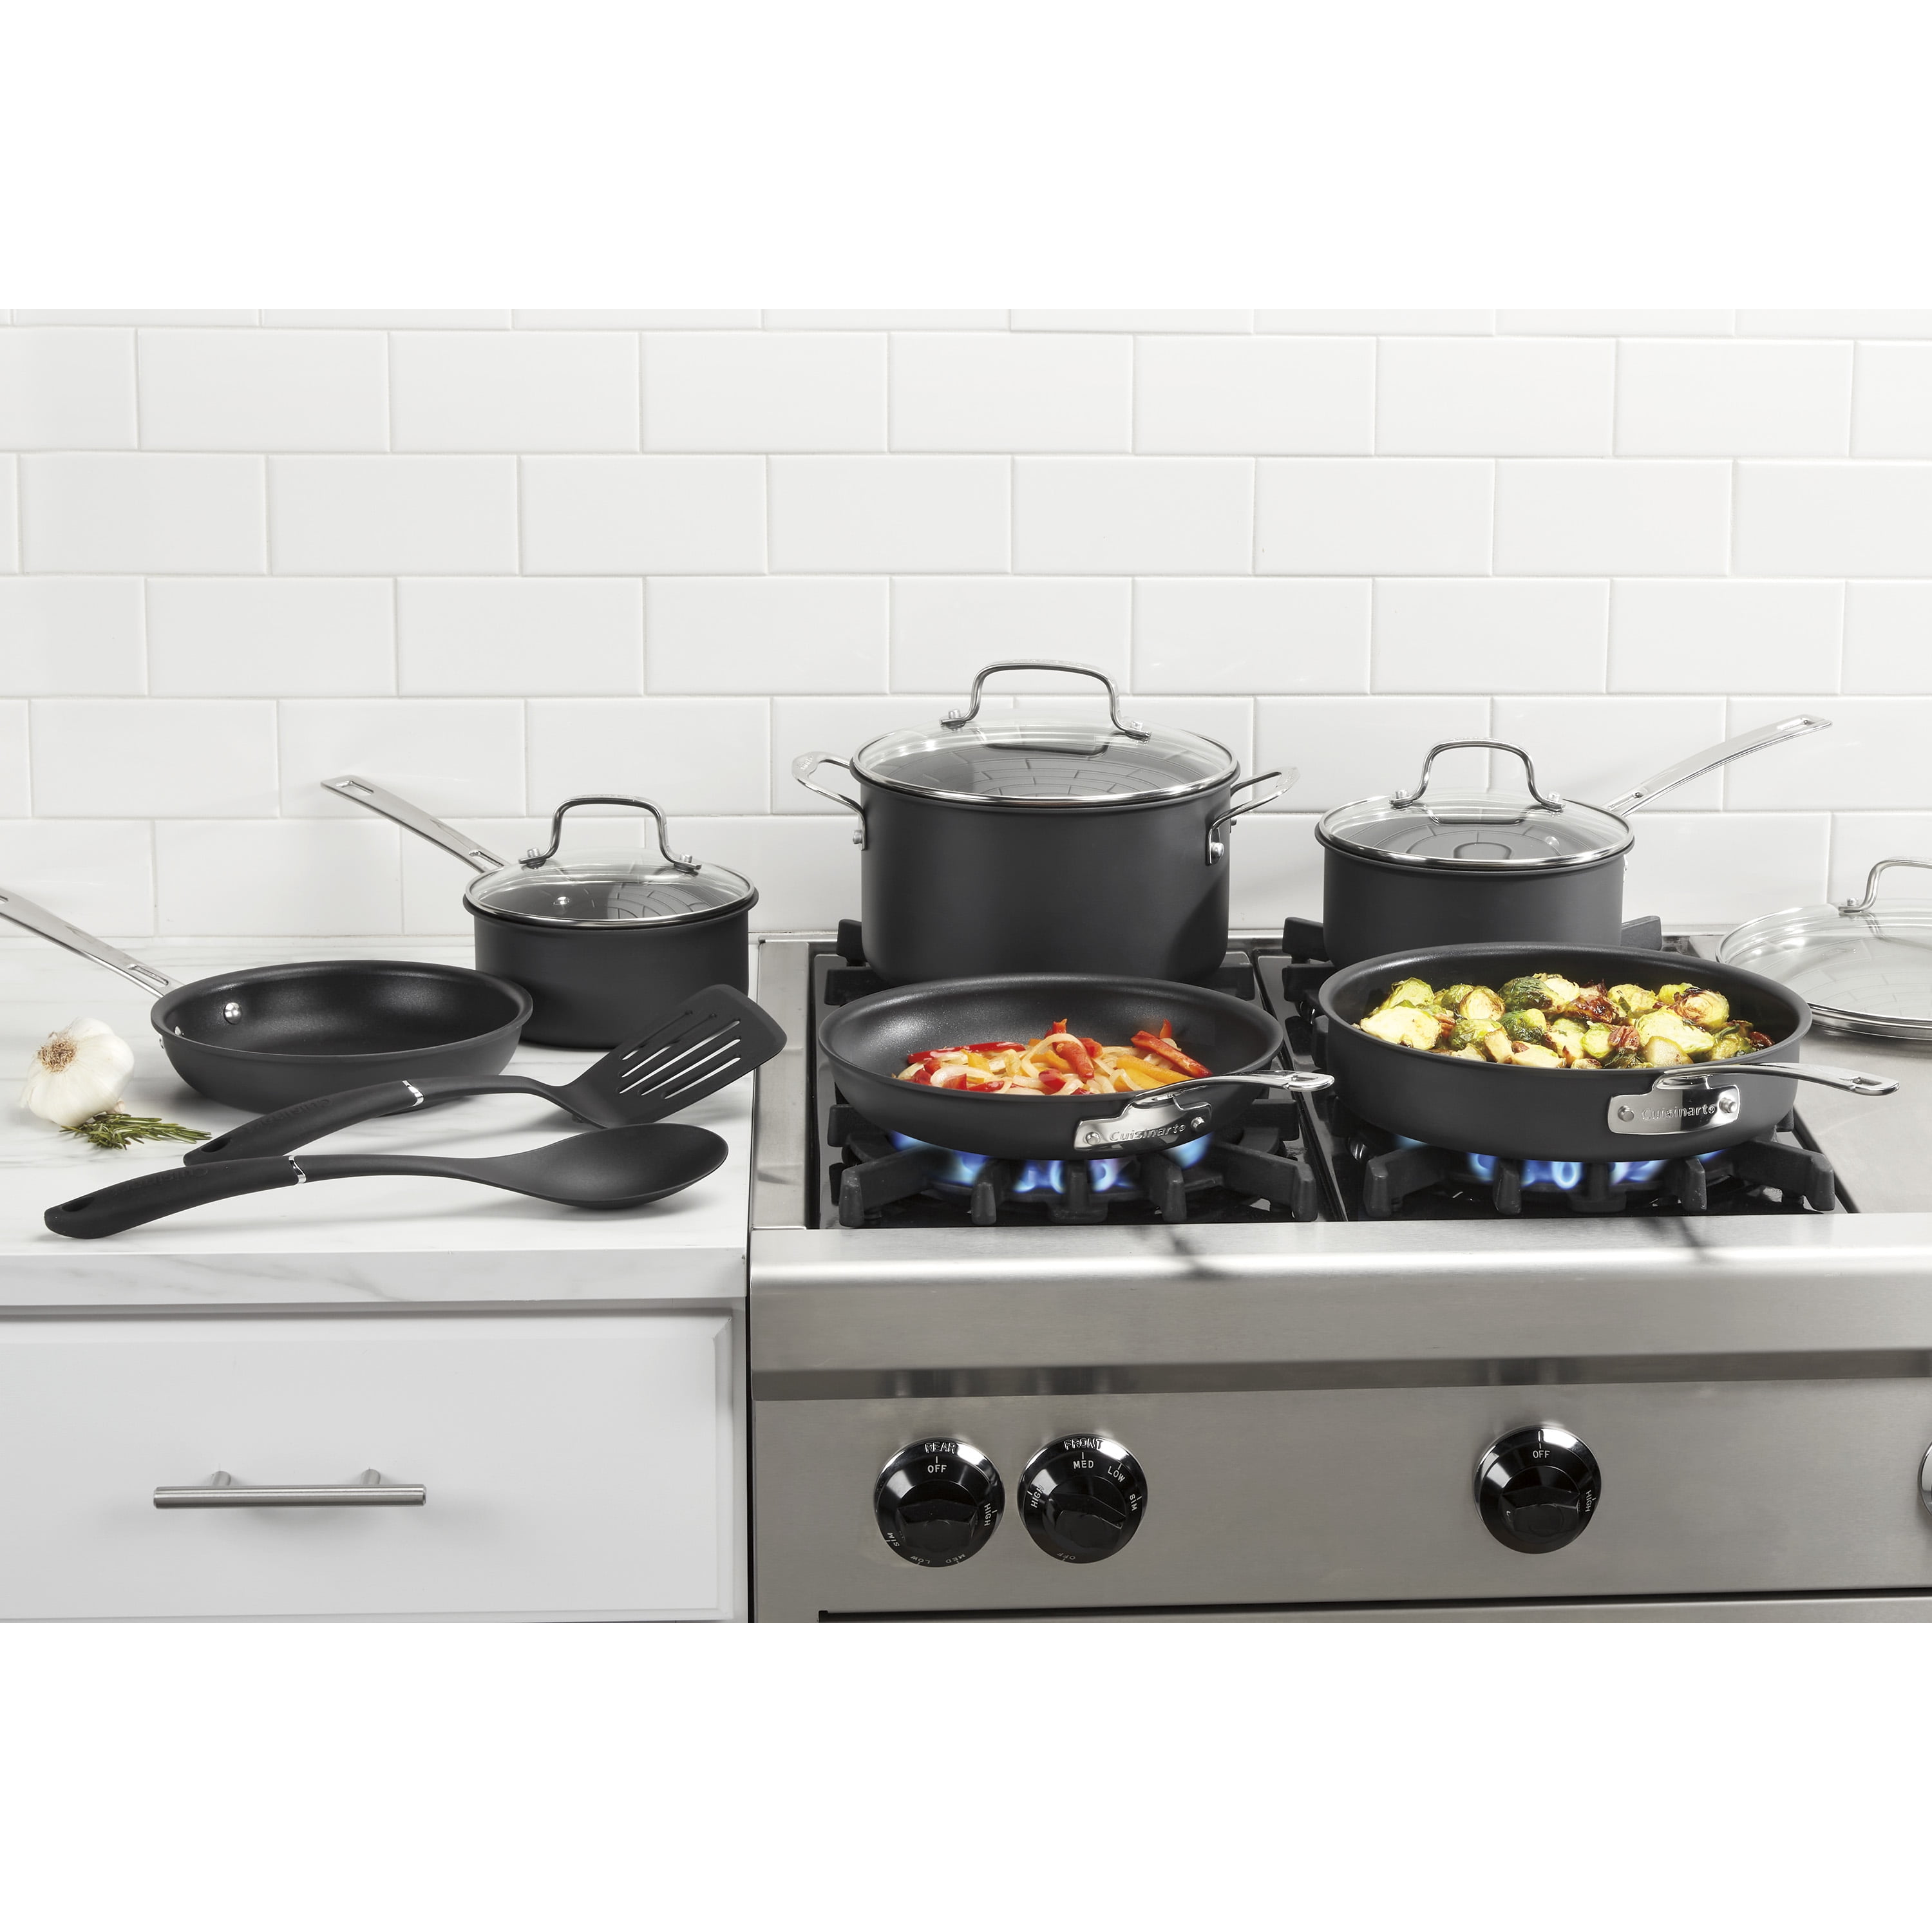 A 12-Piece Cuisinart Cookware Set Is on Sale for $299 on